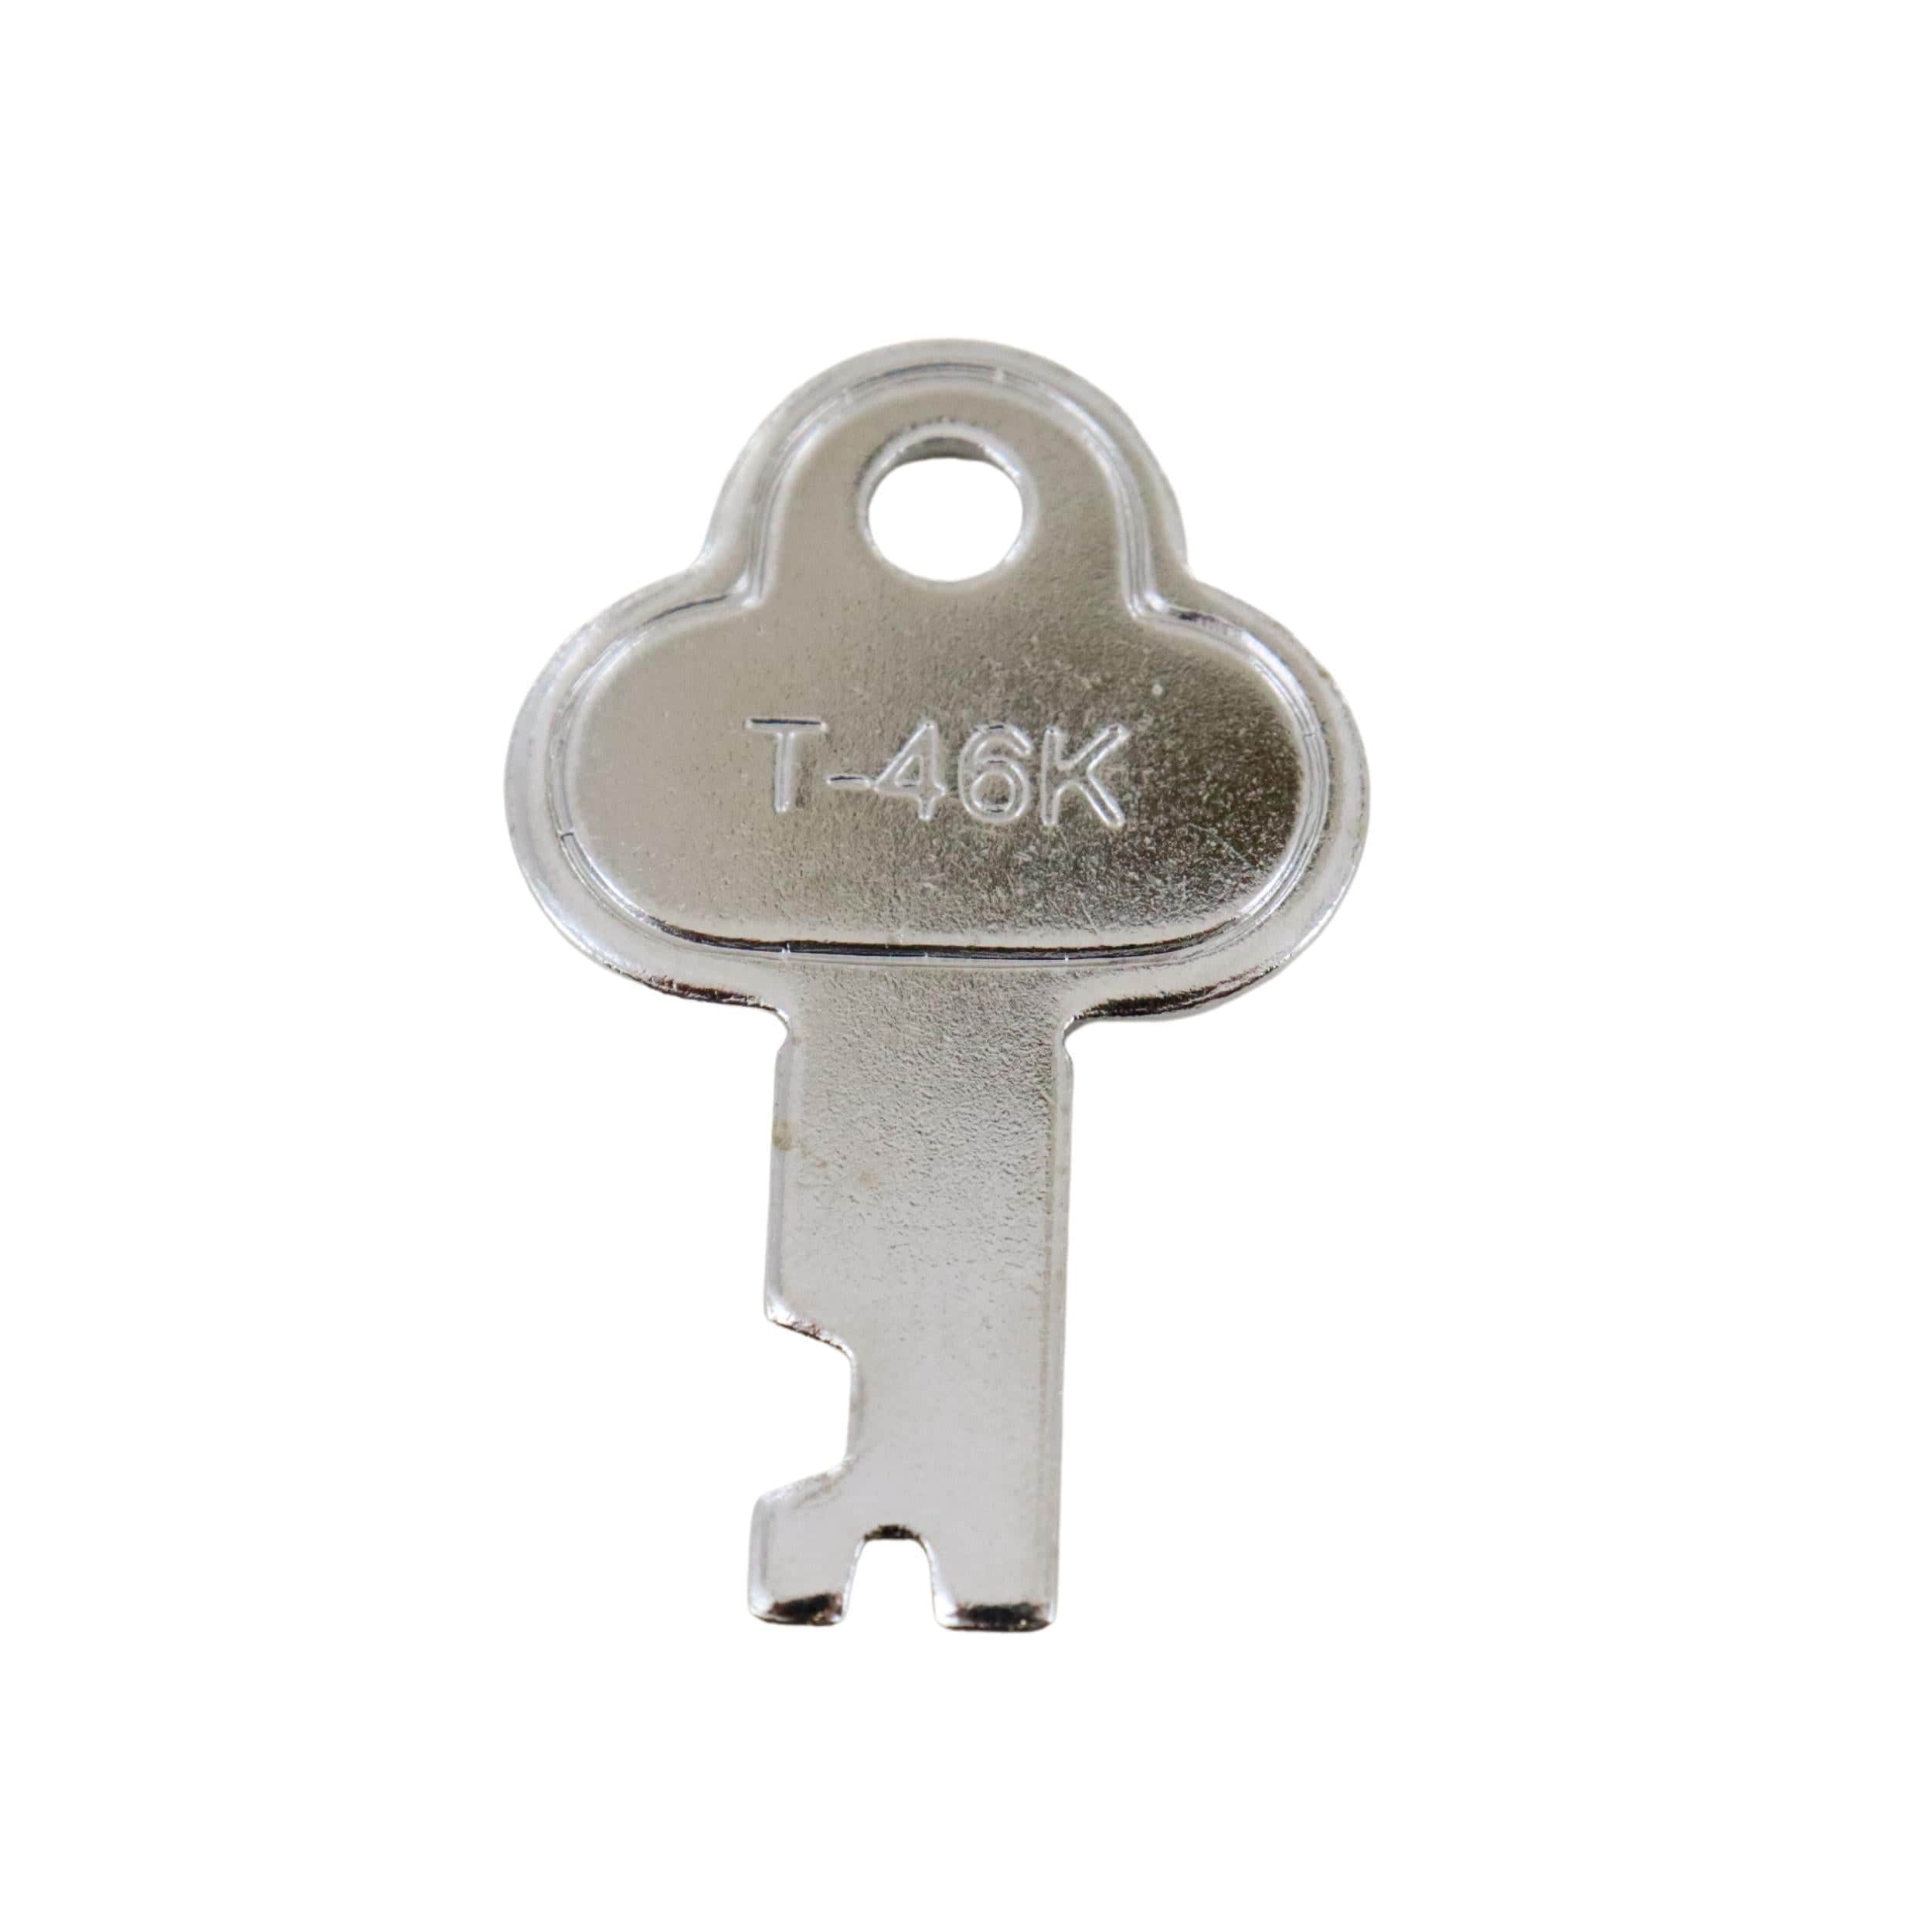 Extra Trunk Lock Key for G-1 and G-3, Steel, 5pk, #T-46K